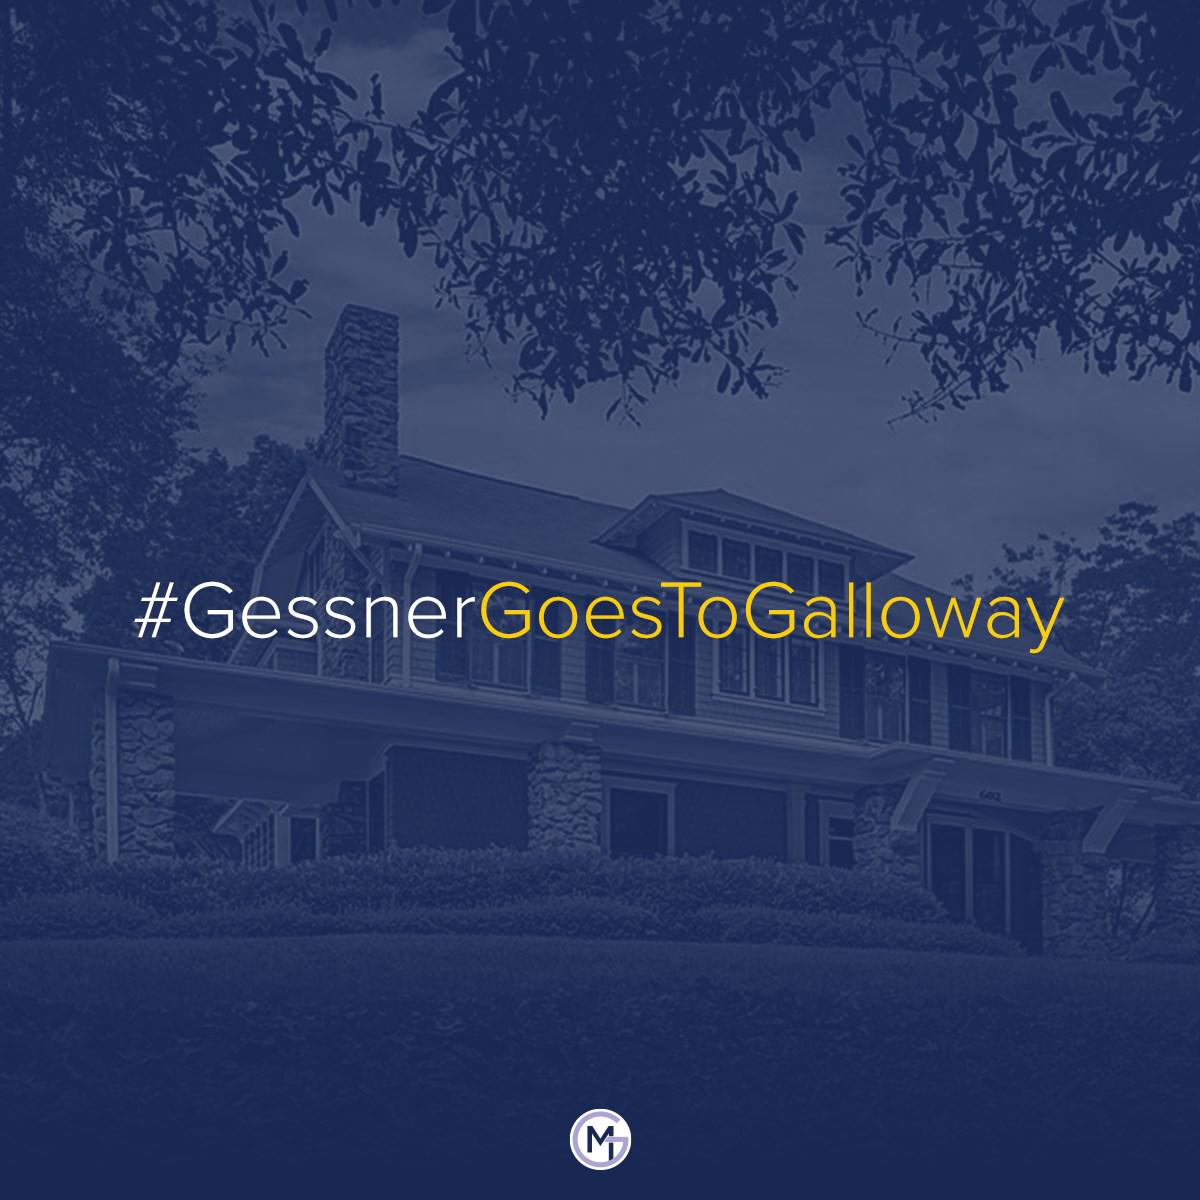 GessnerLaw’s Charlotte, NC office is located in the historic G. G. Galloway House. Built in 1915, it is the only surviving structure in what was once an imposing residential district on the western end of East Morehead Street in Dilworth, Charlotte’s first streetcar suburb. The G. G. Galloway House was recently saved from the wrecking ball to be restored to its original elegance and character.